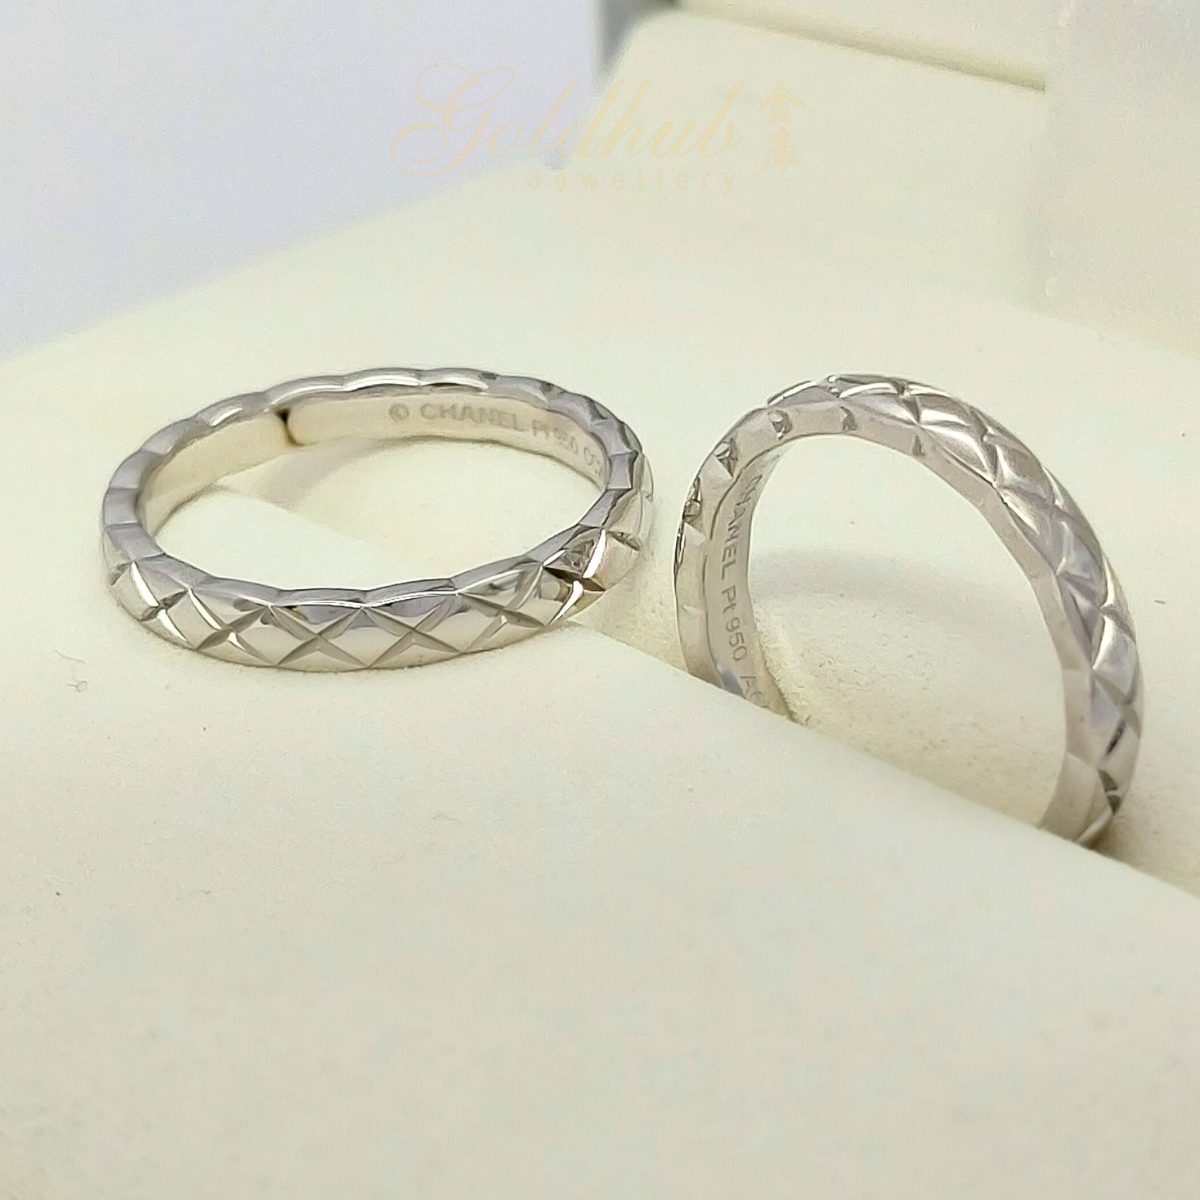 Pt950 Pre-loved Chanel Coco Crush Ring (a pair) in Platinum